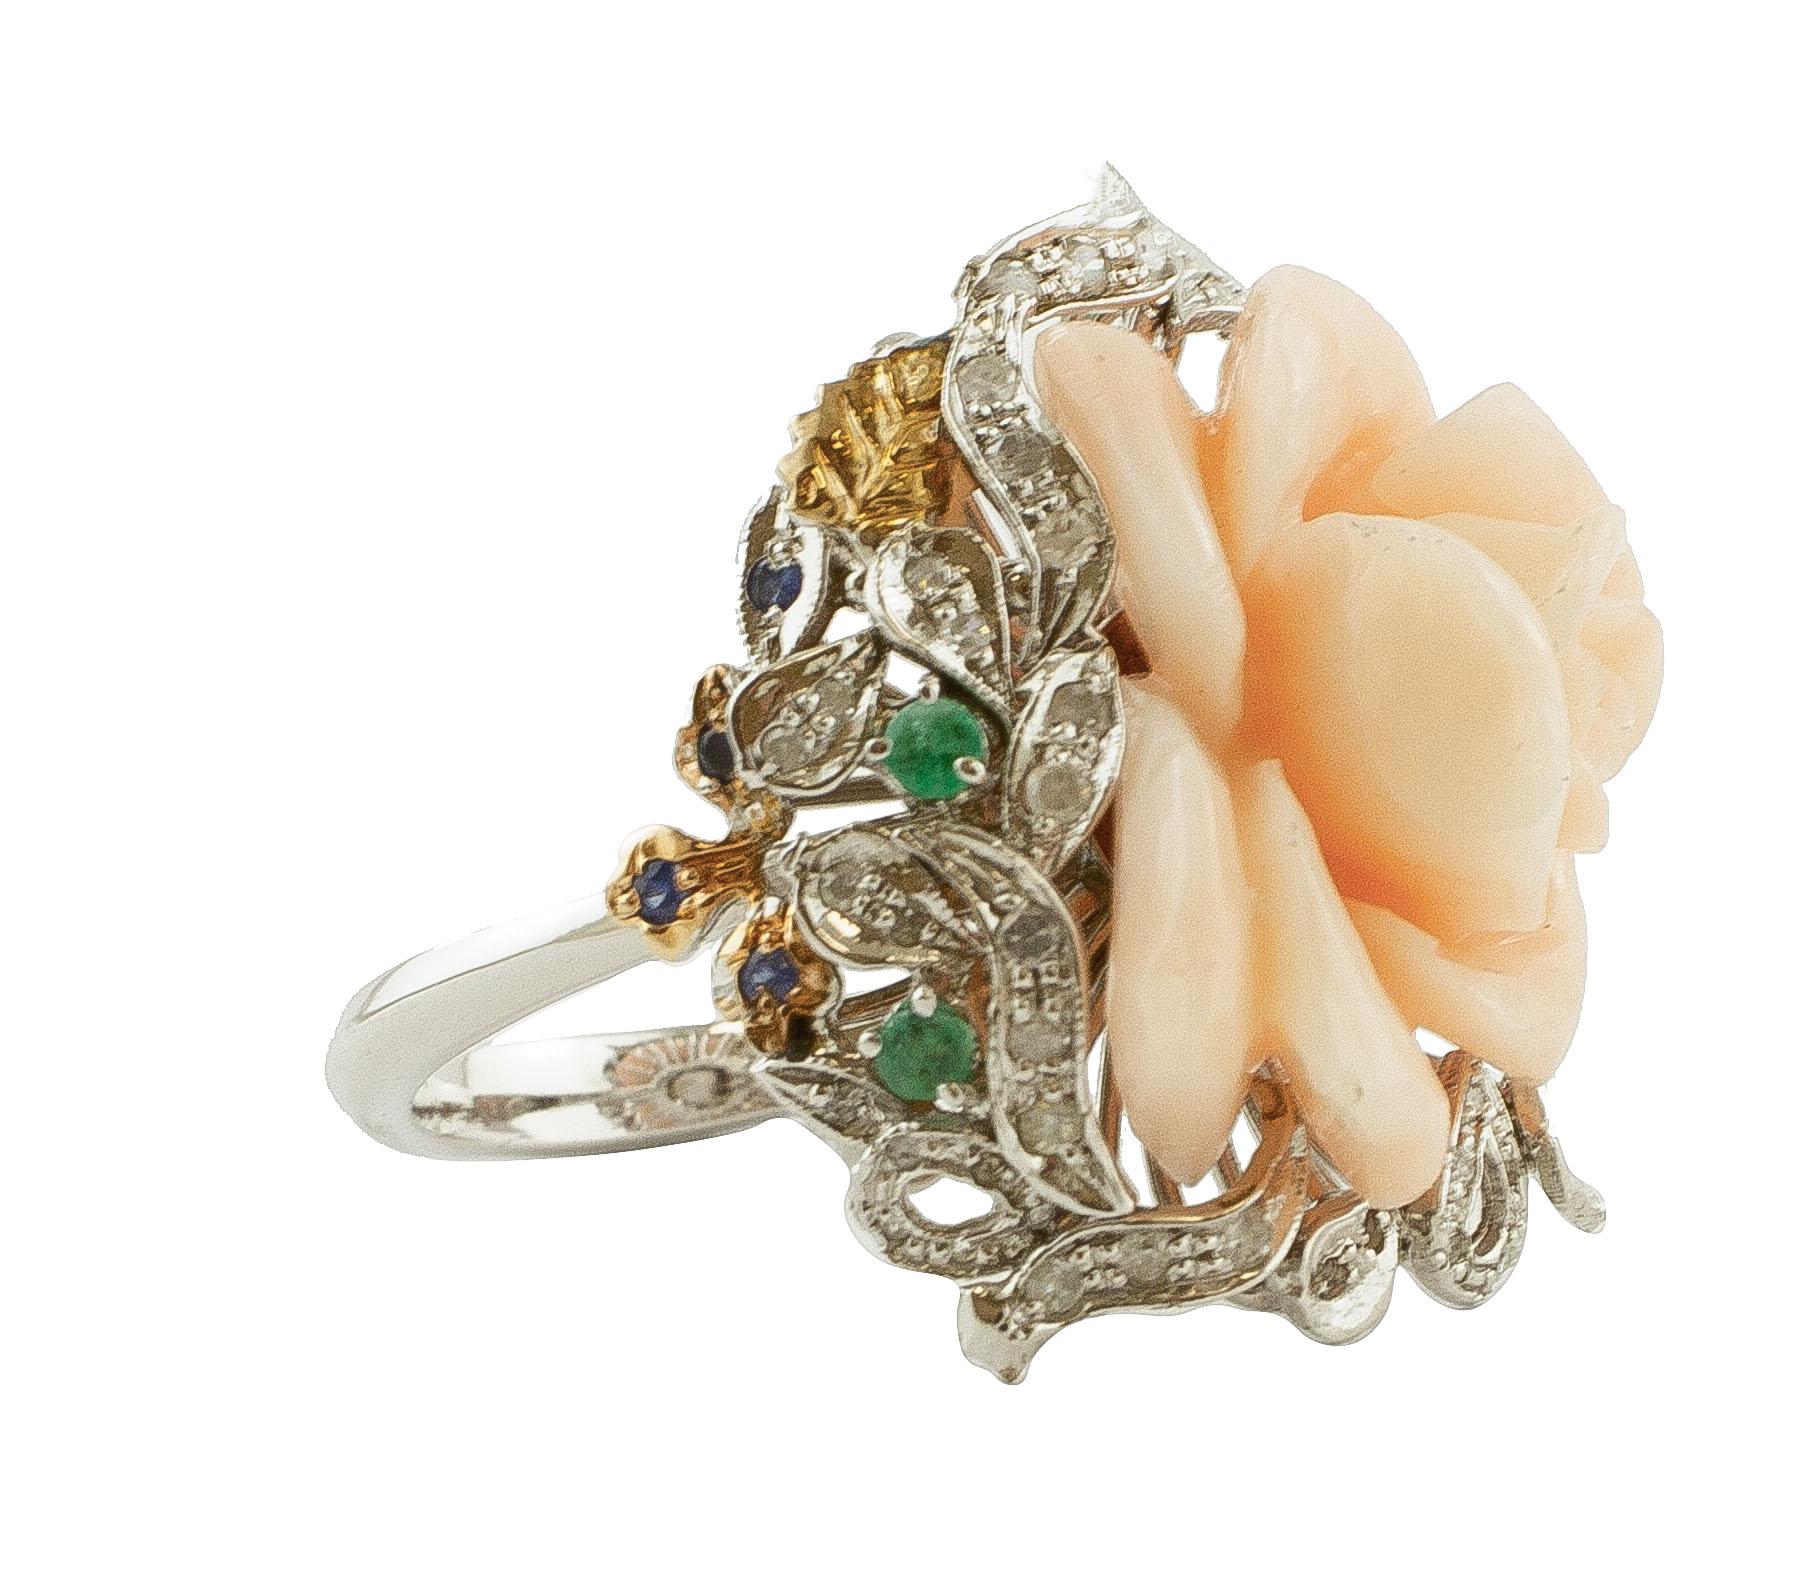 SHIPPING POLICY:
No additional costs will be added to this order.
Shipping costs will be totally covered by the seller (customs duties included).

Cocktail ring in 14k white gold structure, mounted with a finely carved pink coral rose in the centre,